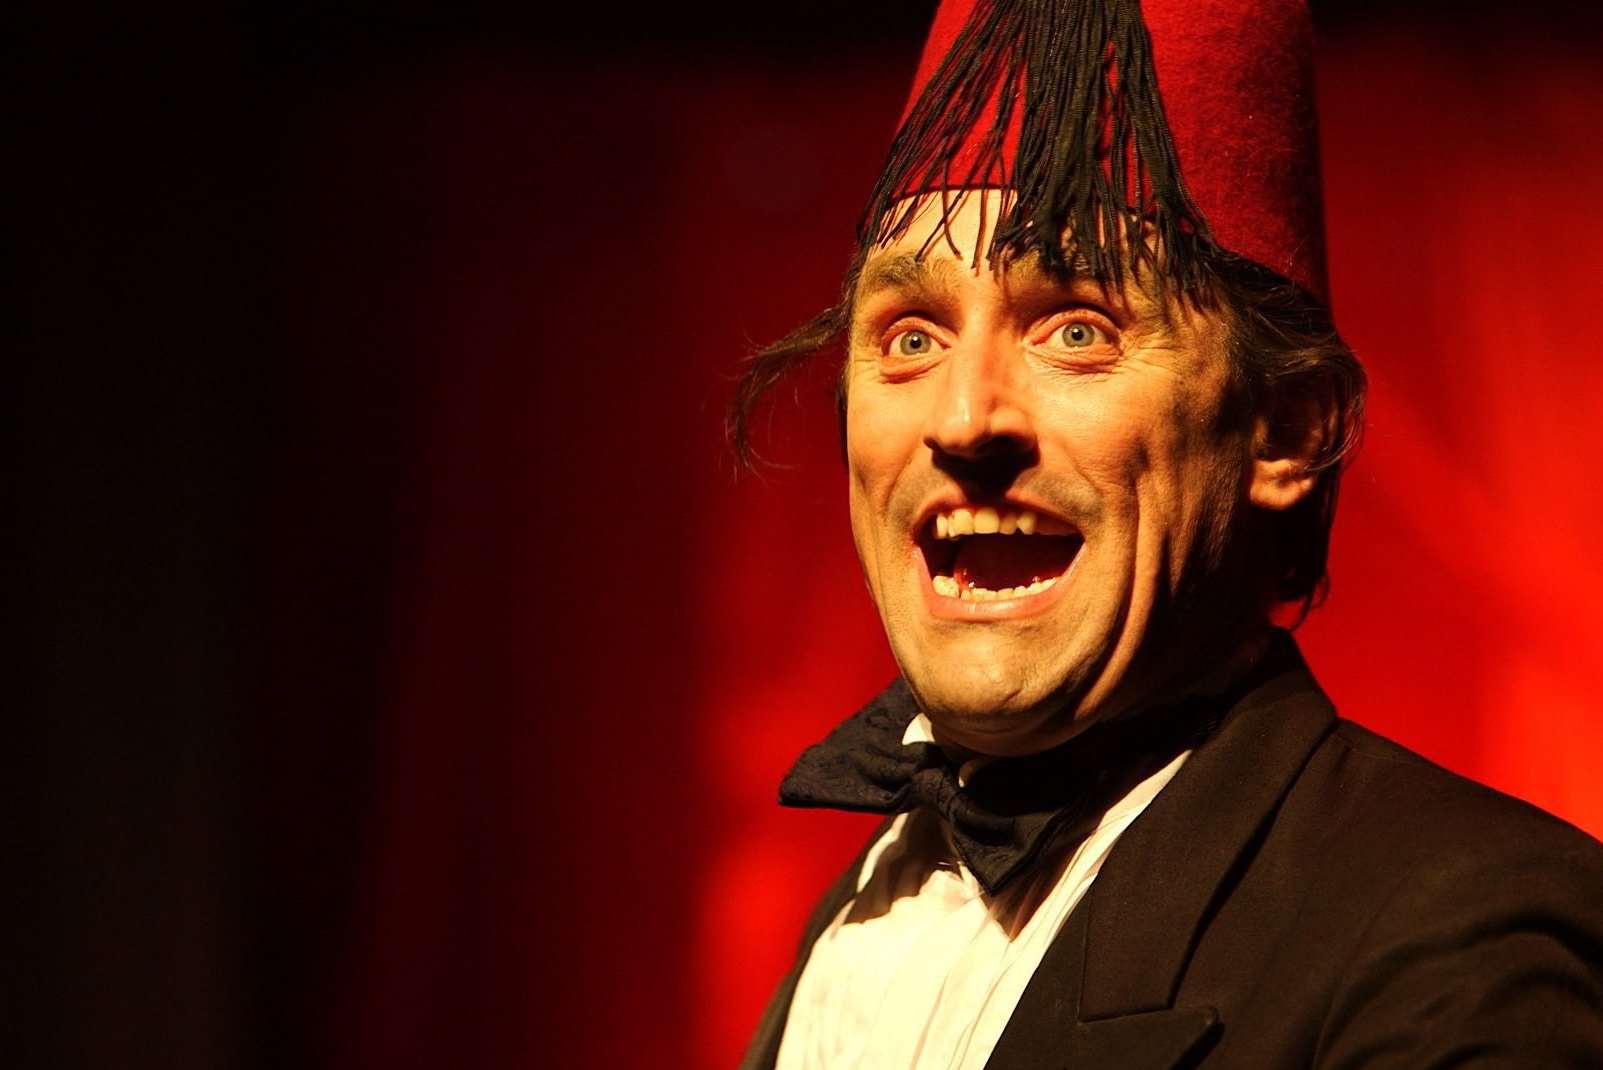 Daniel Taylor as Tommy Cooper